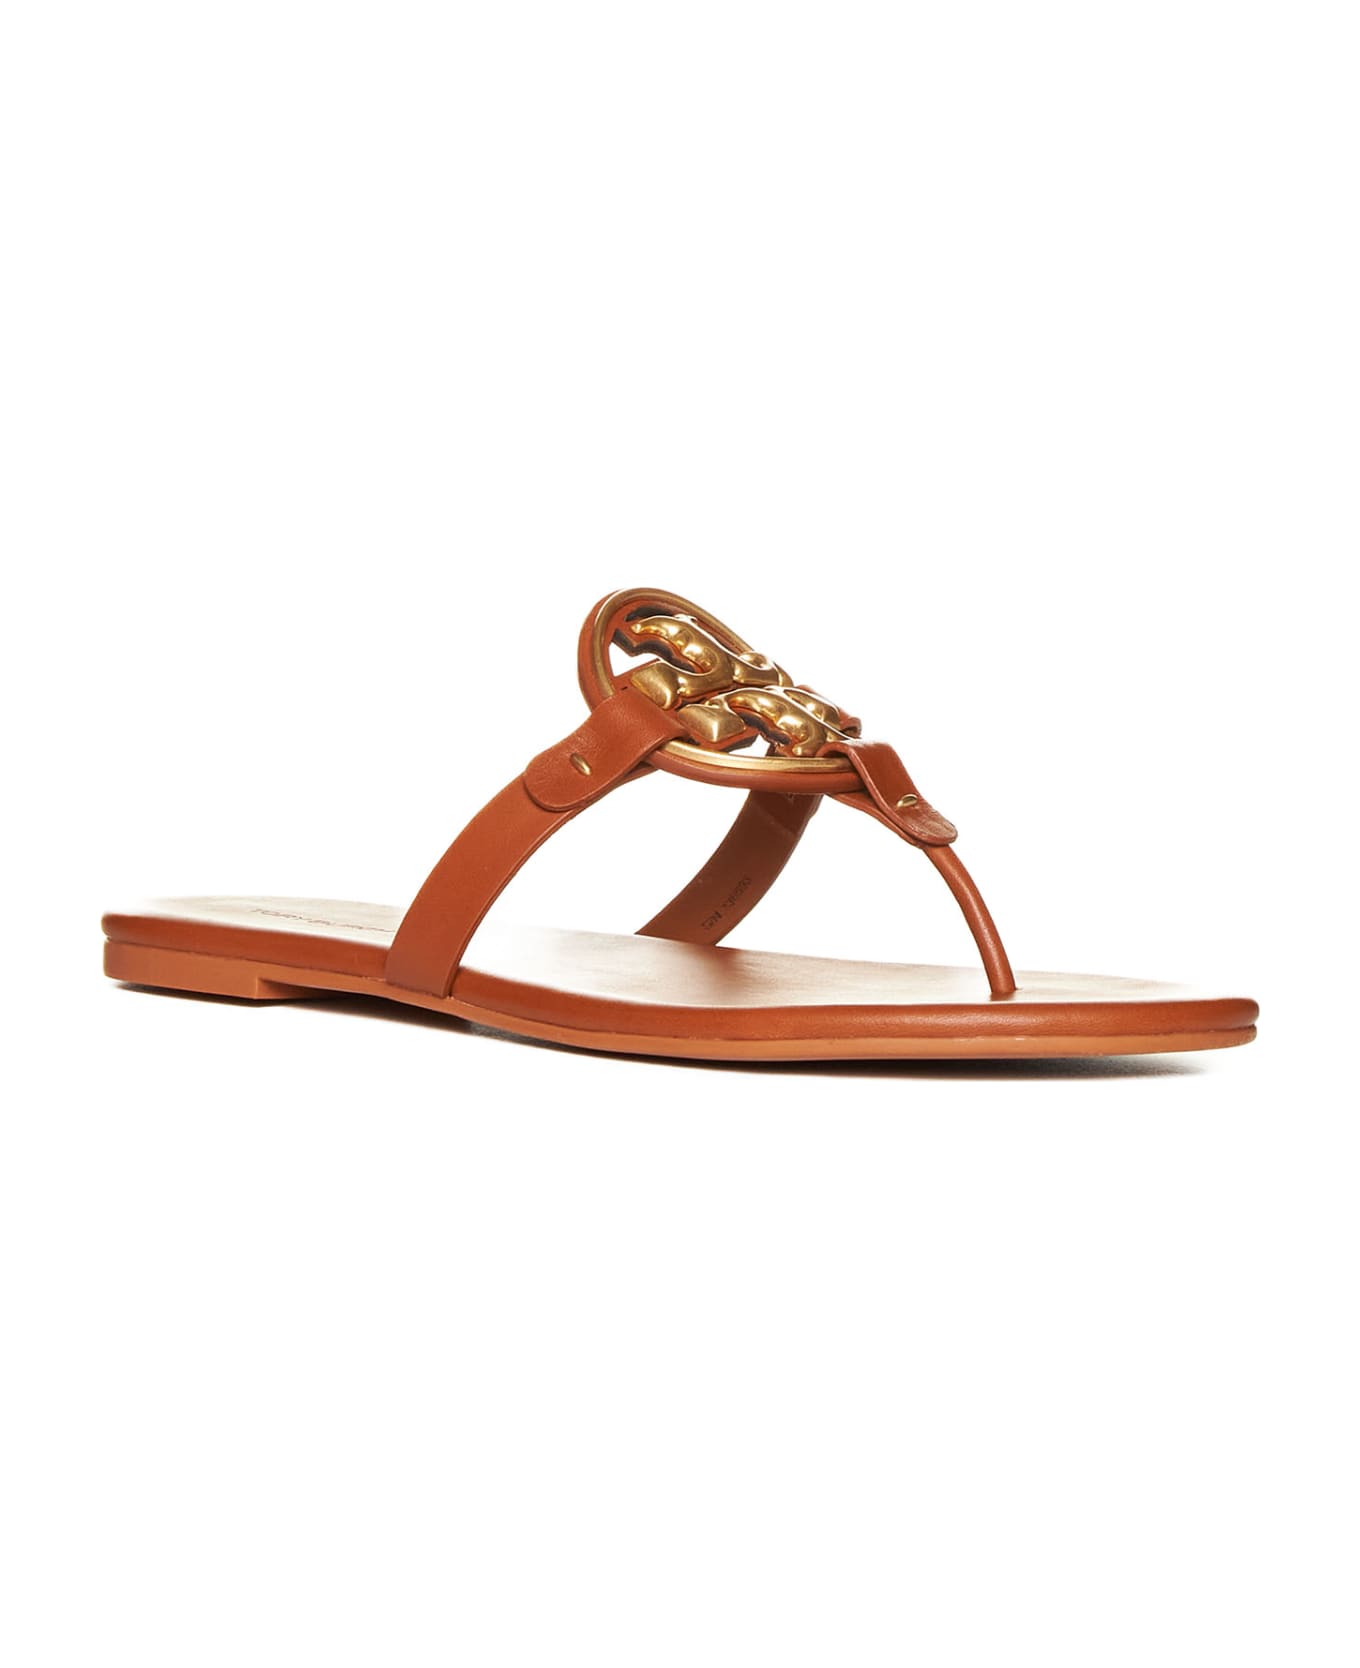 Tory Burch Flip Flop Sandals With Logo - Brown